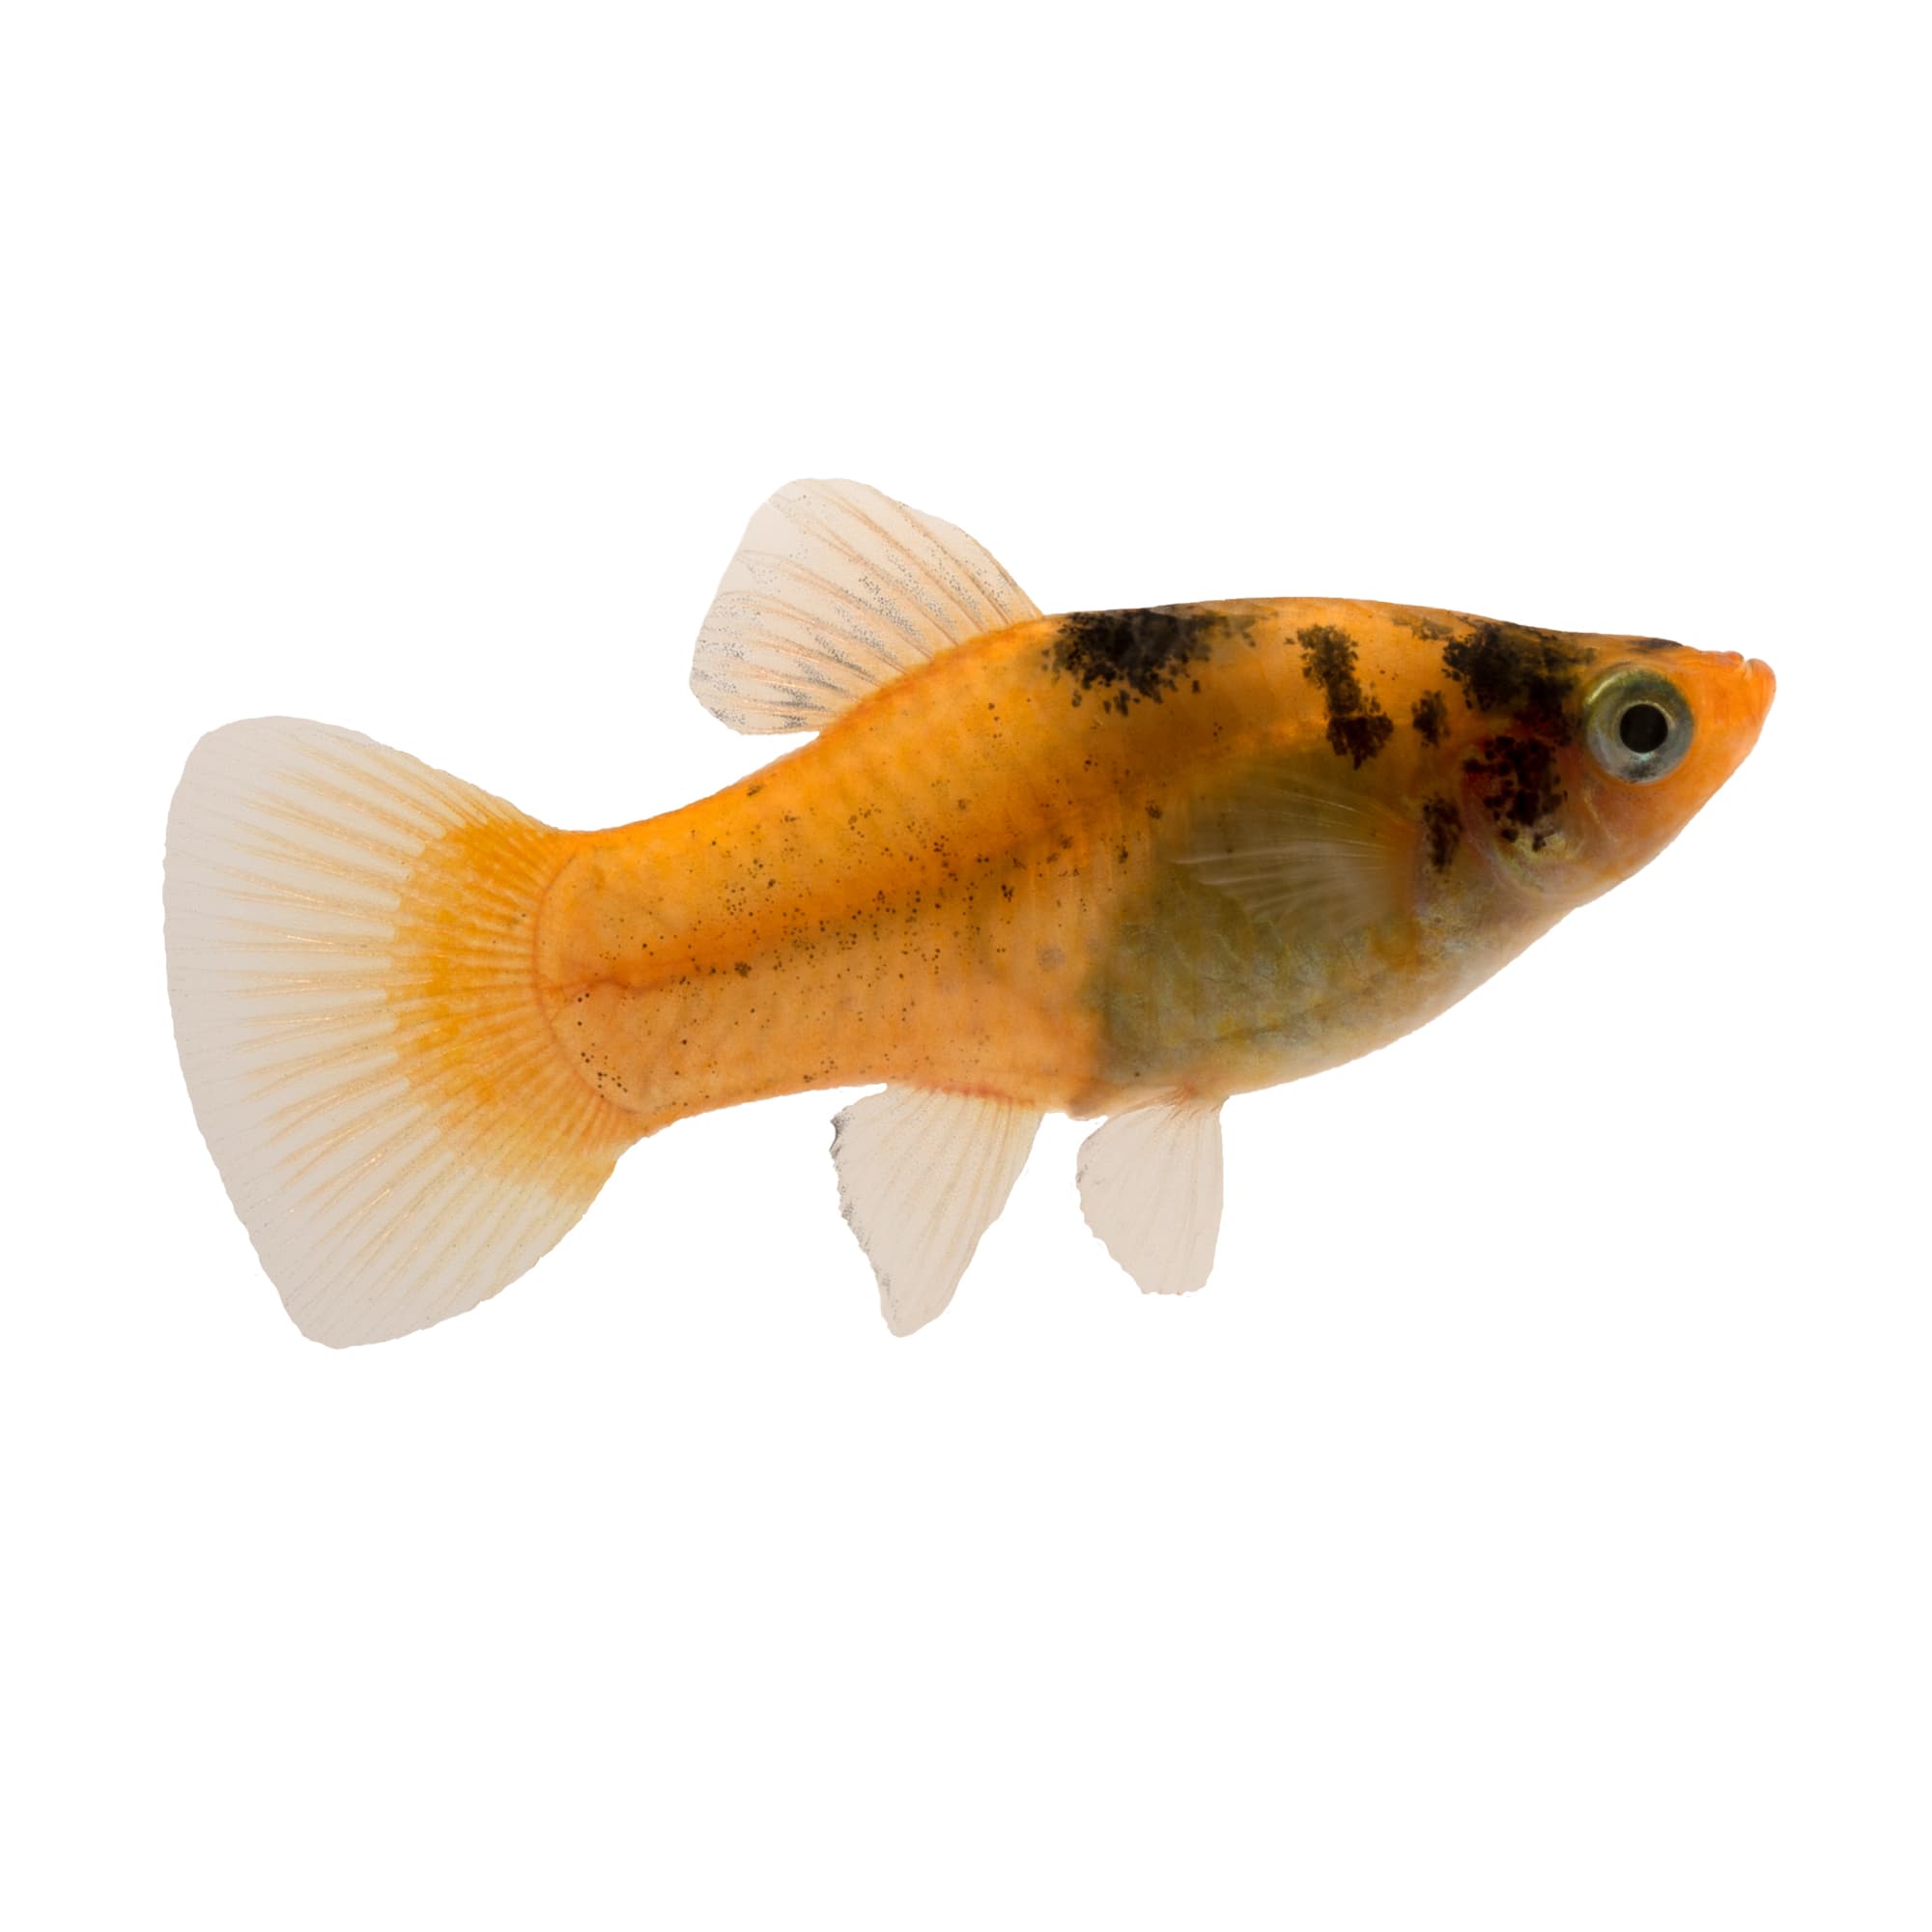 Platy Fish For Sale